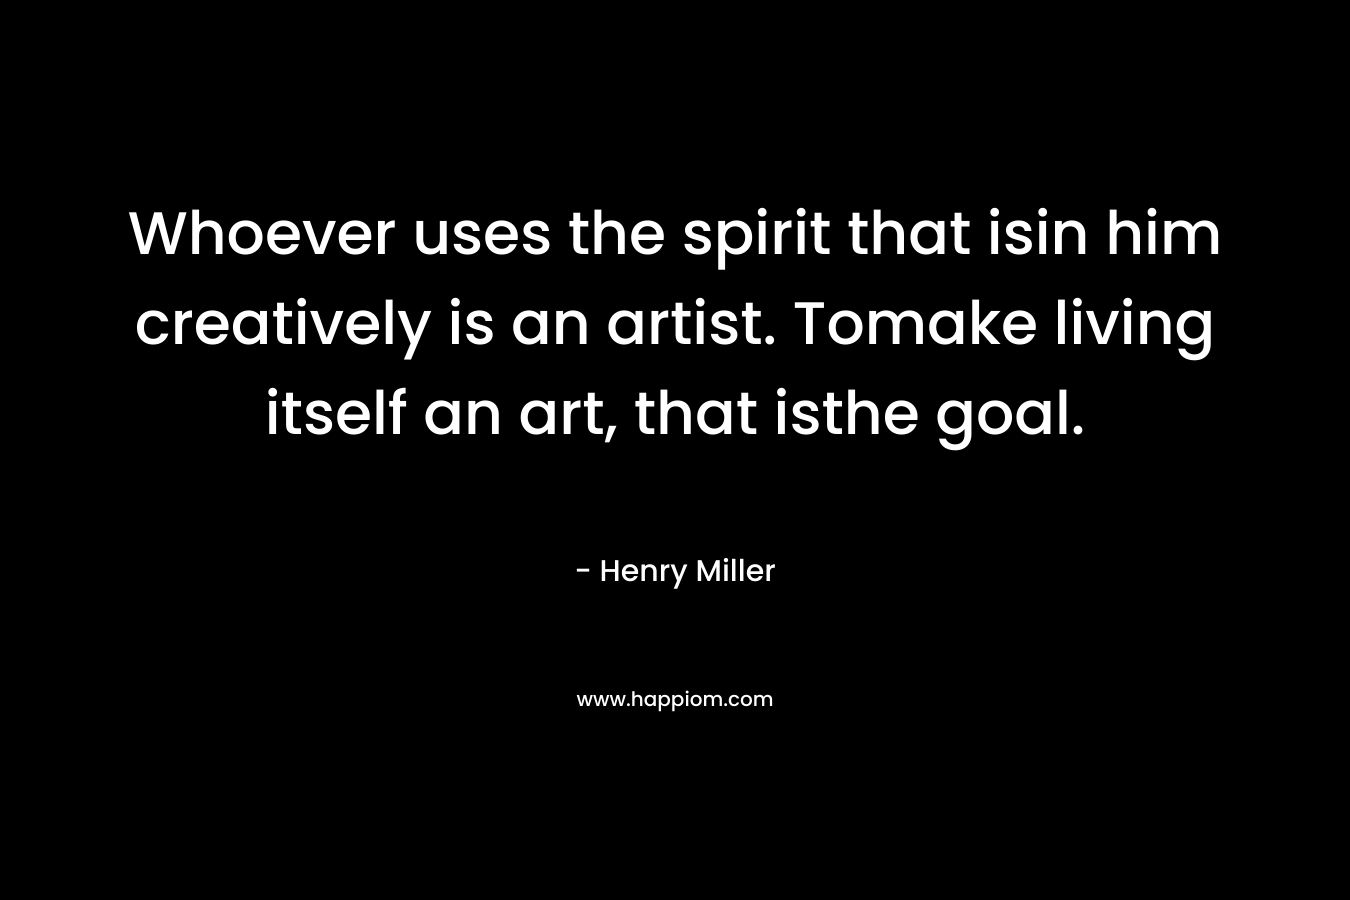 Whoever uses the spirit that isin him creatively is an artist. Tomake living itself an art, that isthe goal. – Henry Miller